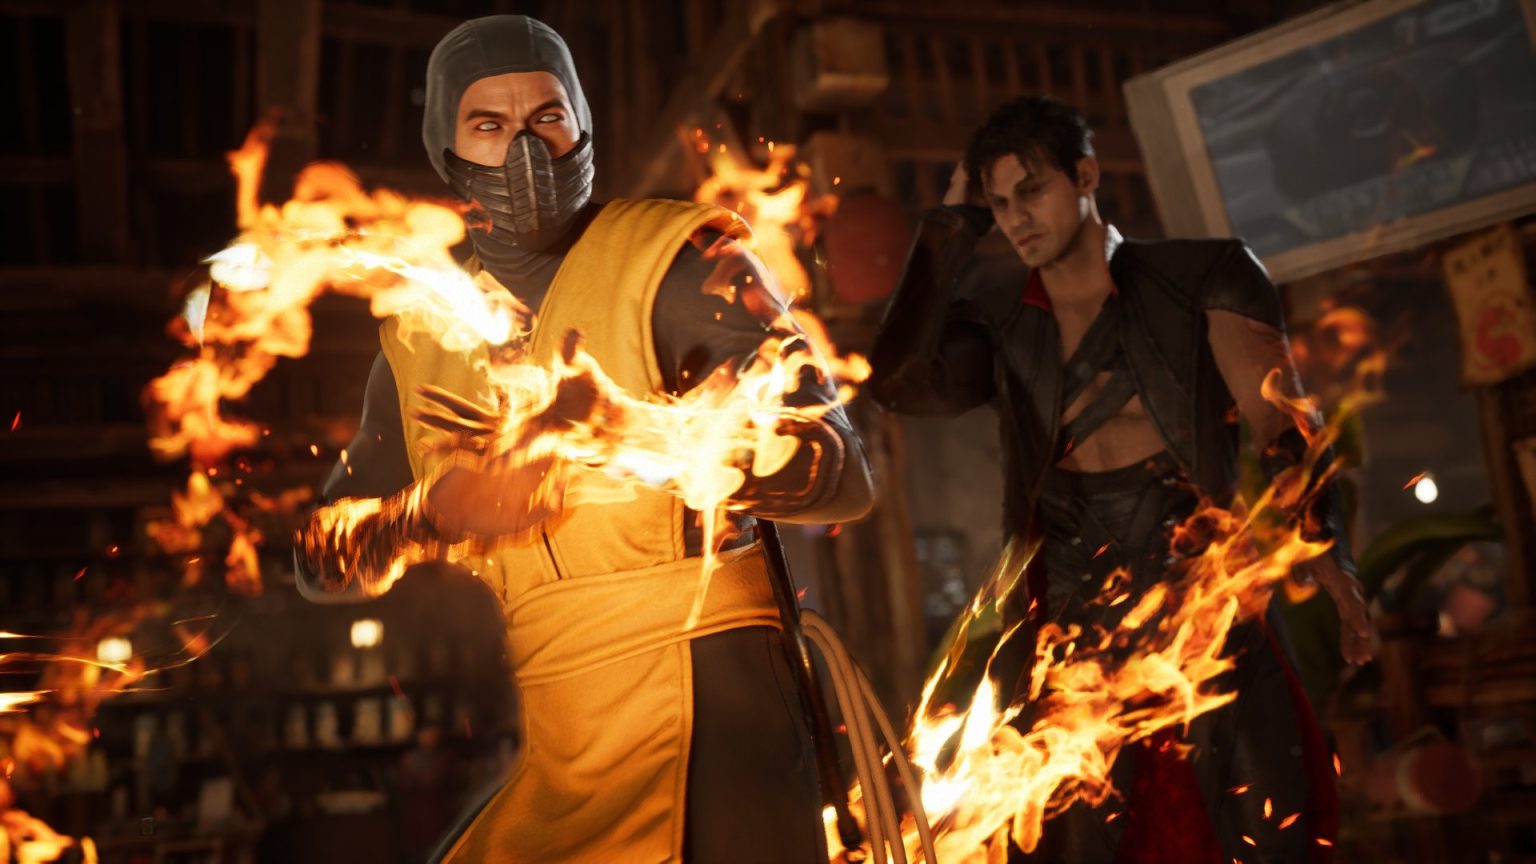 Mortal Kombat 1 will feature skins from the 1995 film